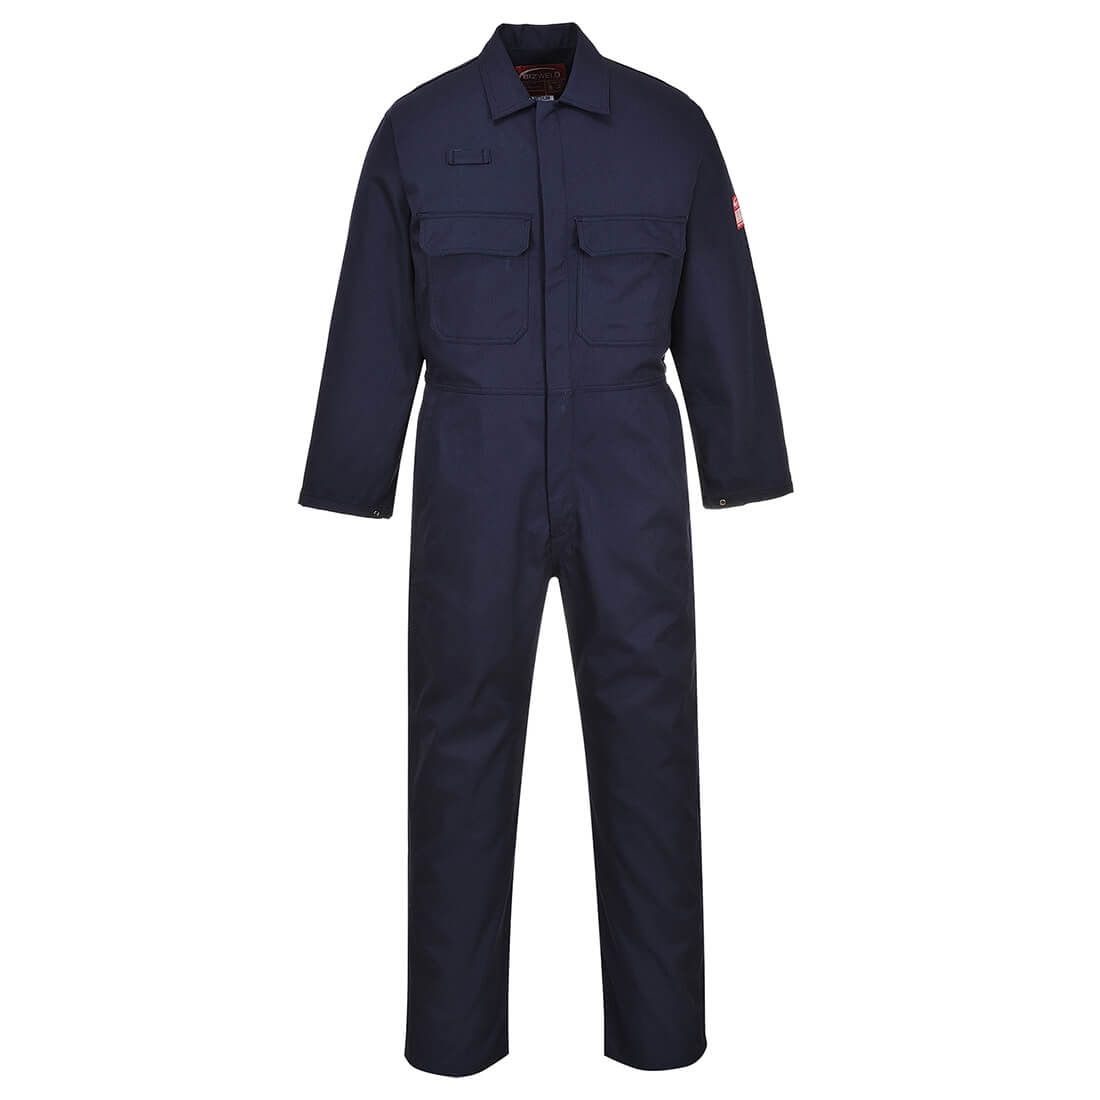 Image of Biz Weld Mens Flame Resistant Overall Navy Blue XS 32"